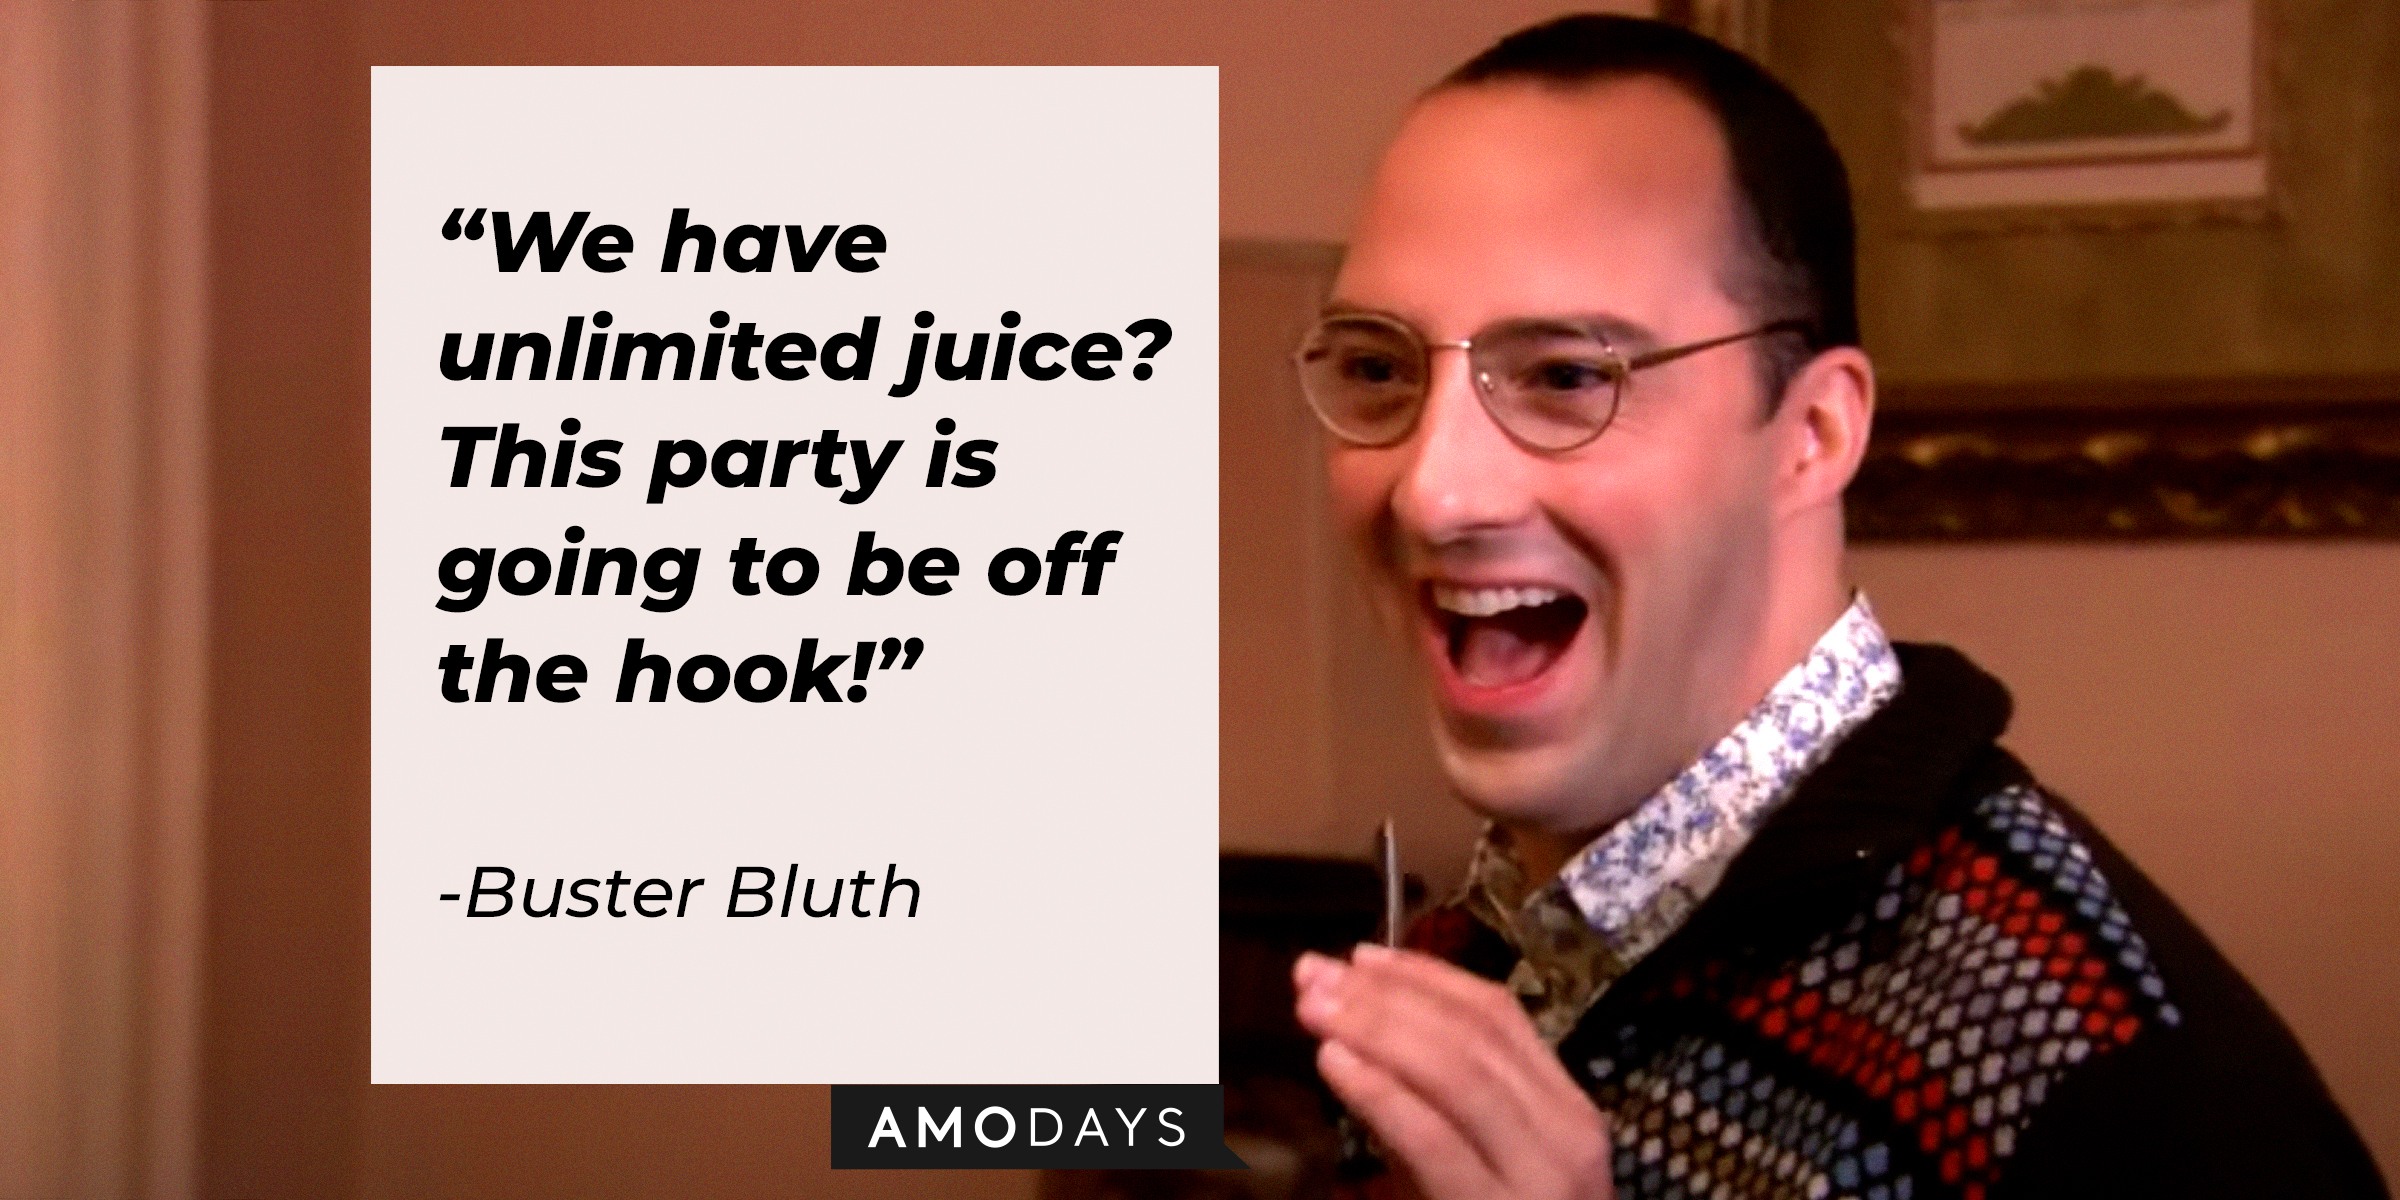 Buster Bluth, with his quote: "We have unlimited juice? This party is going to be off the hook!" | Source: youtube.com/arresteddev